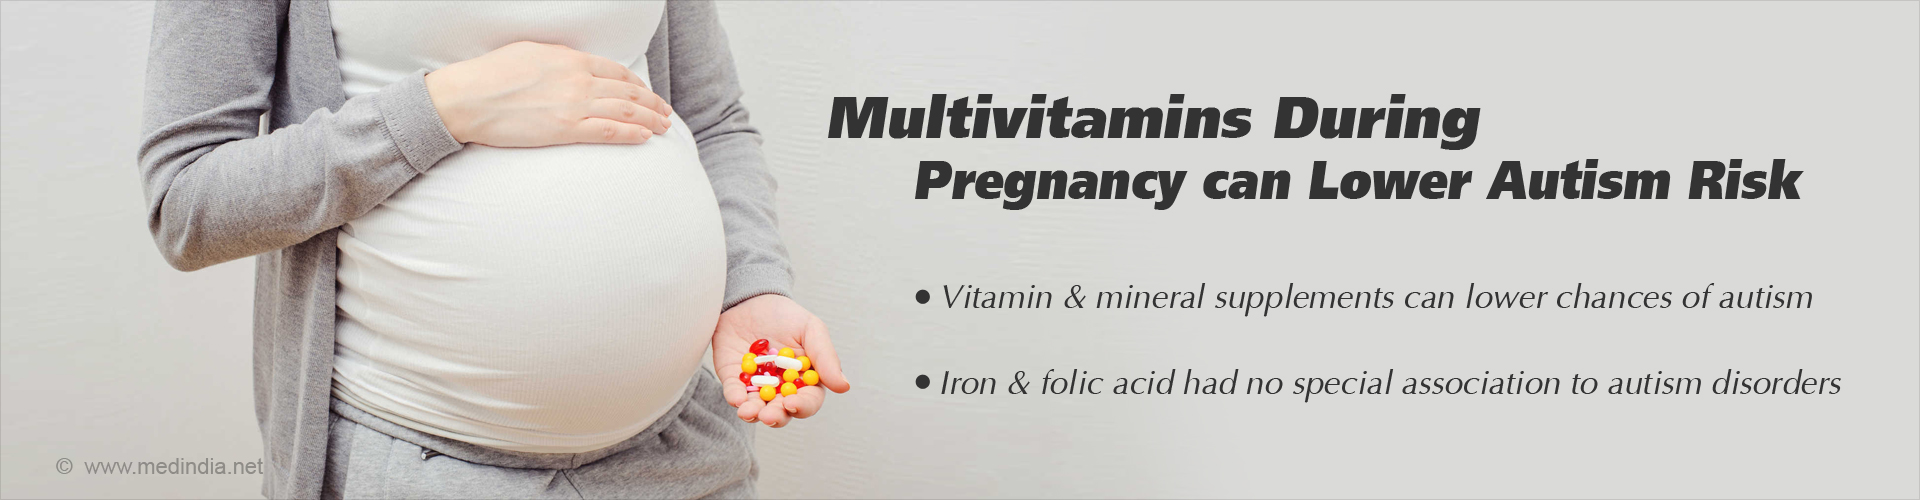 Multivitamins during pregnancy can lower autism risk
- Vitamin & mineral supplements can lower chances of autism
- Iron & folic acid had no special association to autism disorders